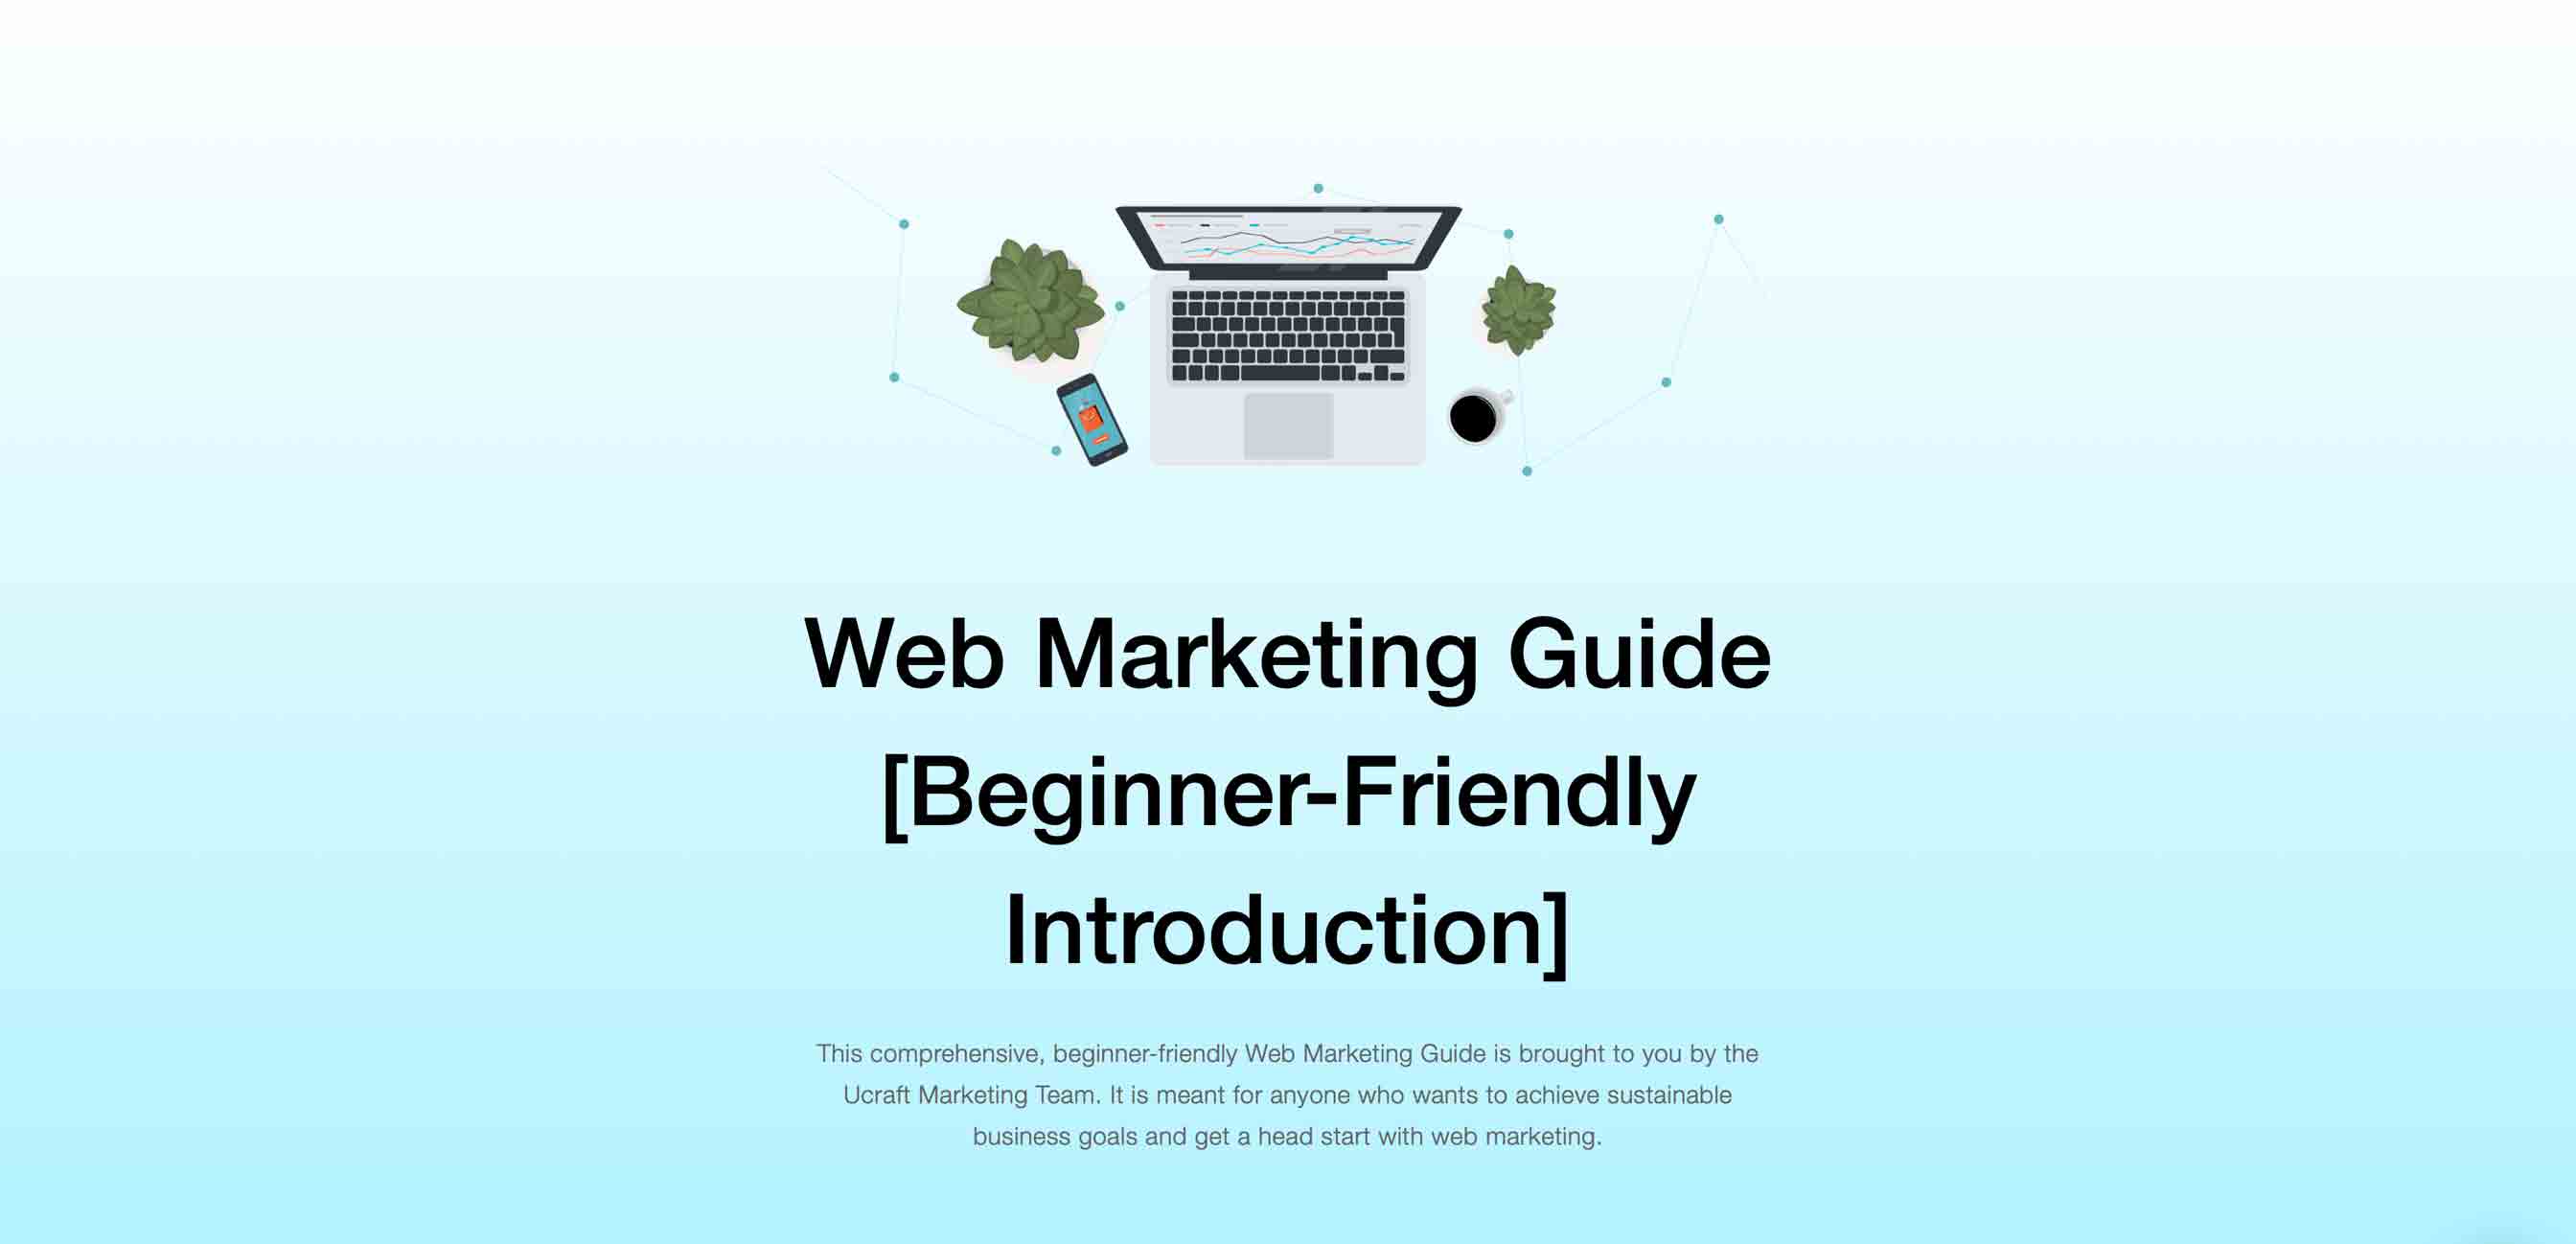 Online Marketing | Beginners Guide from Ucraft